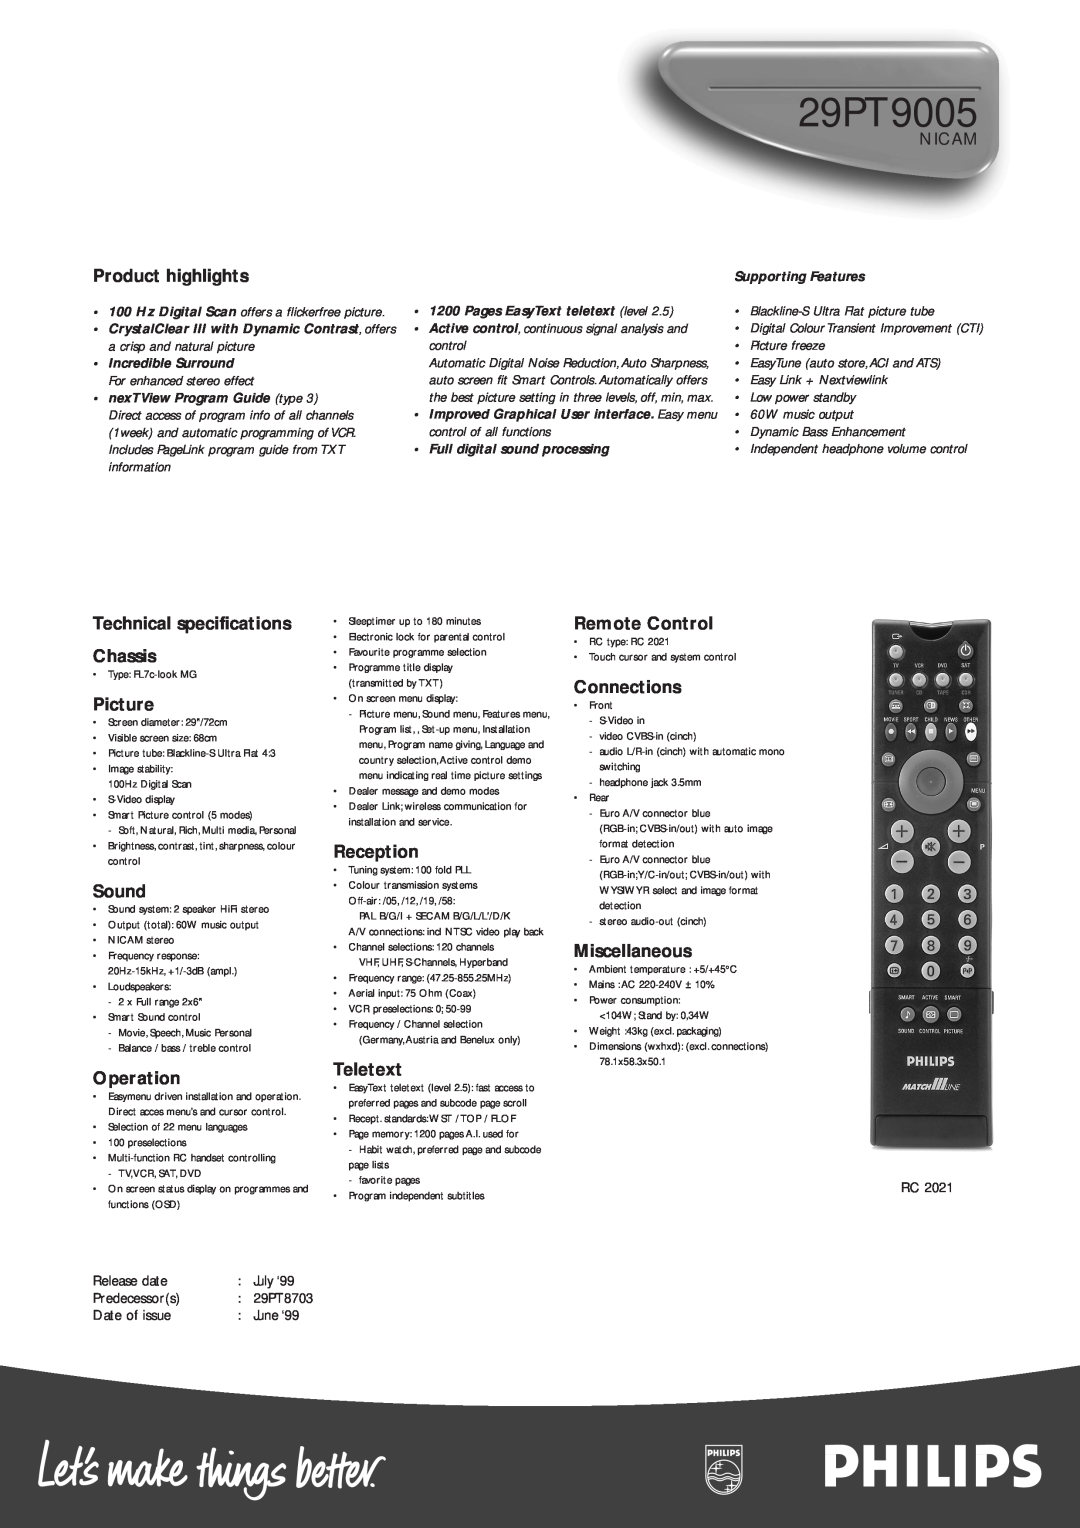 Philips 29PT9005 Nicam manual Product highlights 